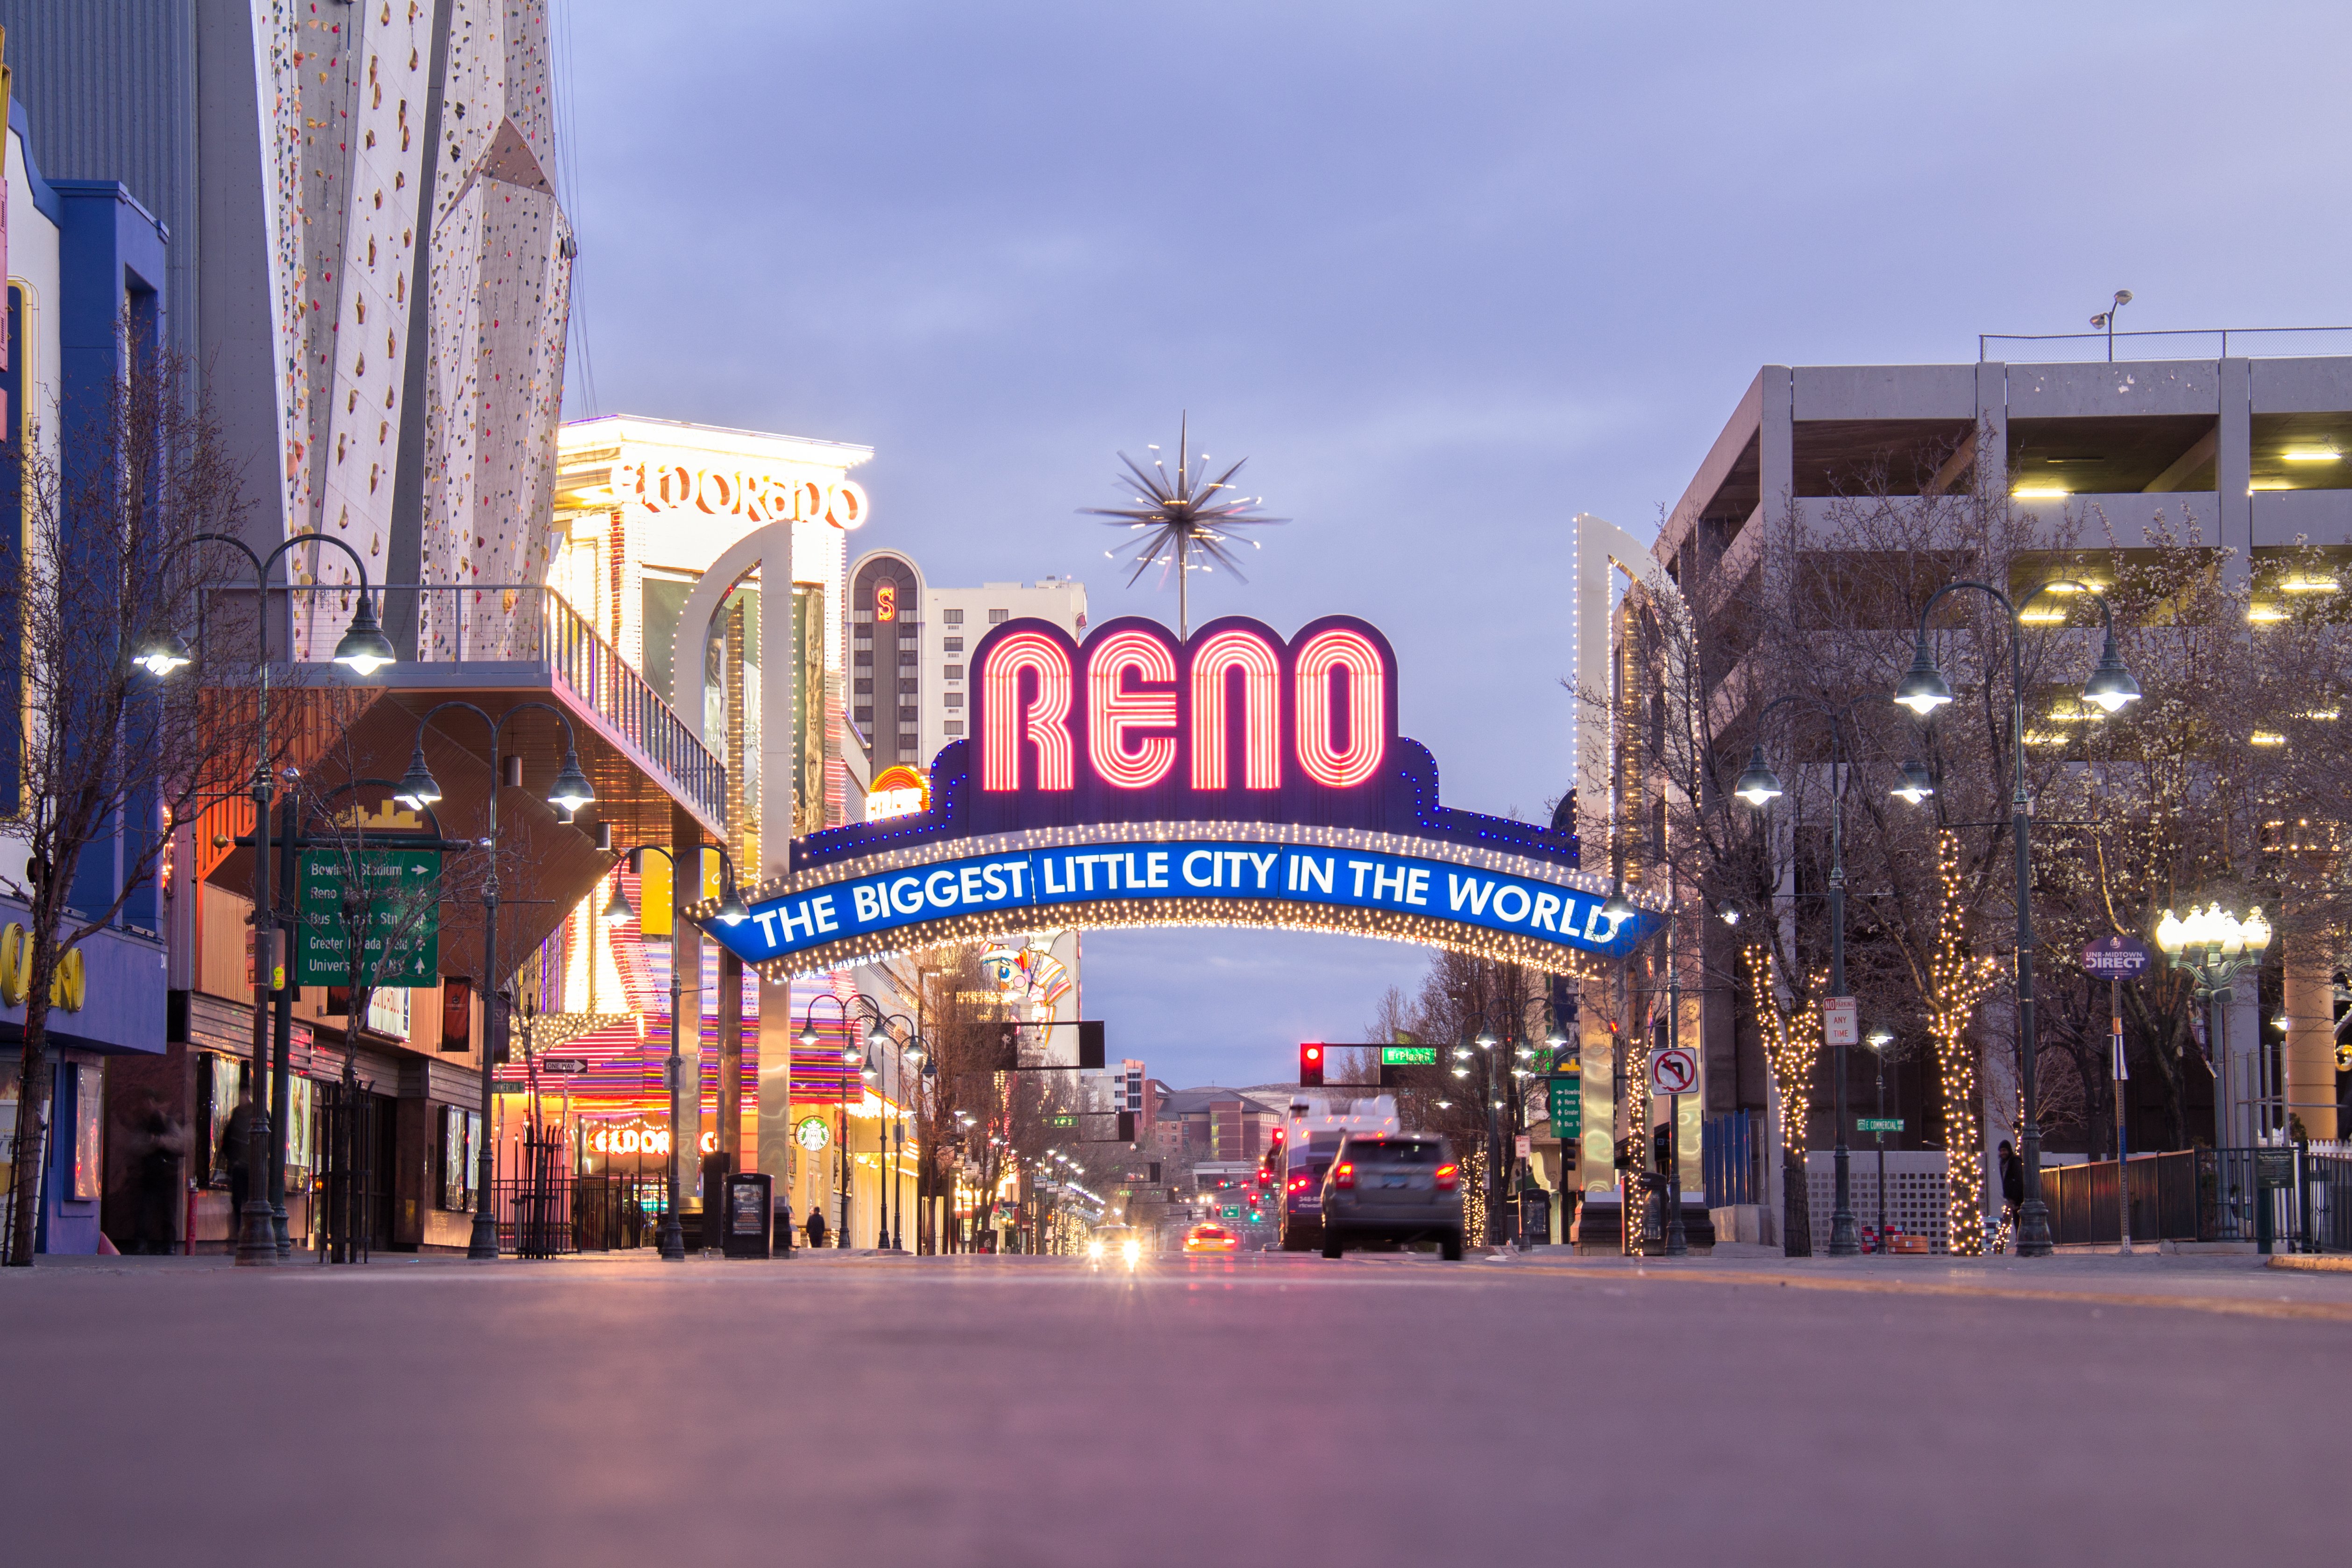 Neon sign for Reno at entrance to the city